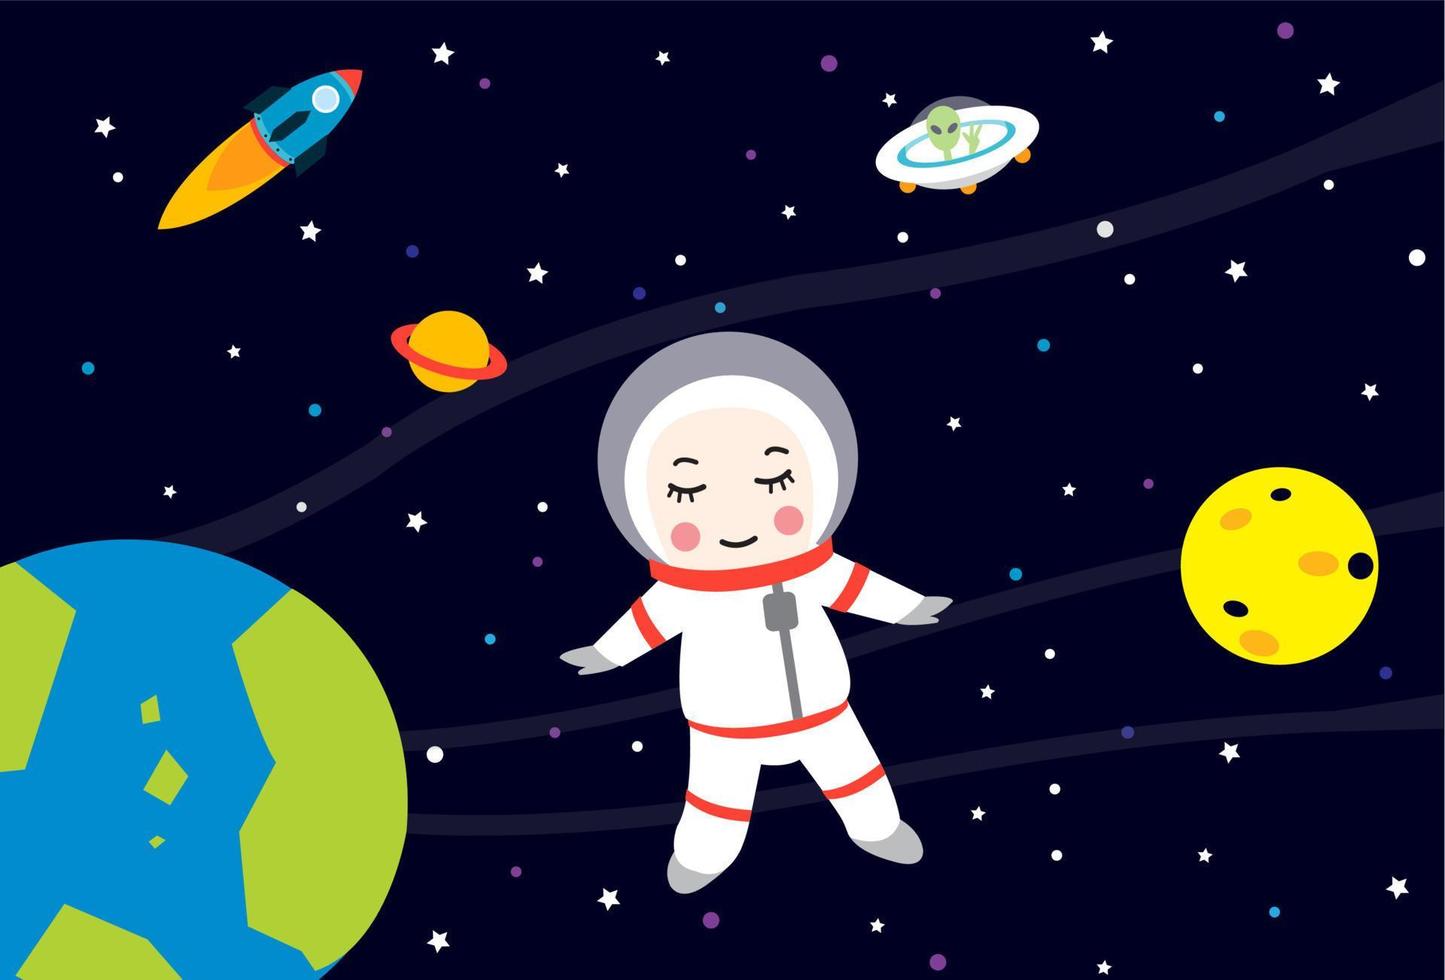 The astronaut is alone in the universe vector in space background. The girl with space suit floating in cosmos with earth, moon, Saturn, UFO, alien, spacecraft and rocket. Cartoon flat design.